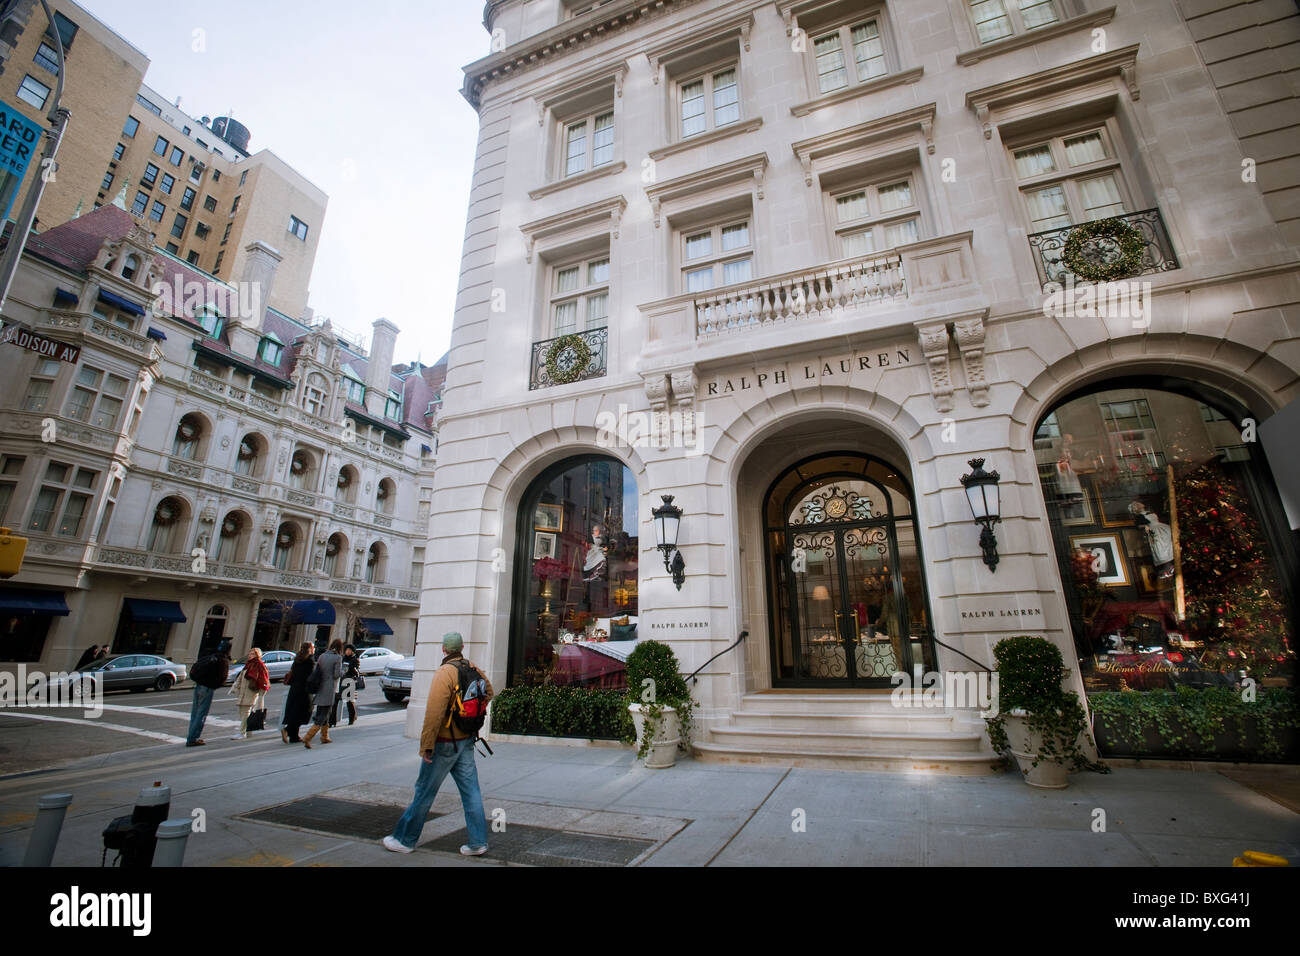 The new Ralph Lauren store on Madison Avenue in New York on Sunday